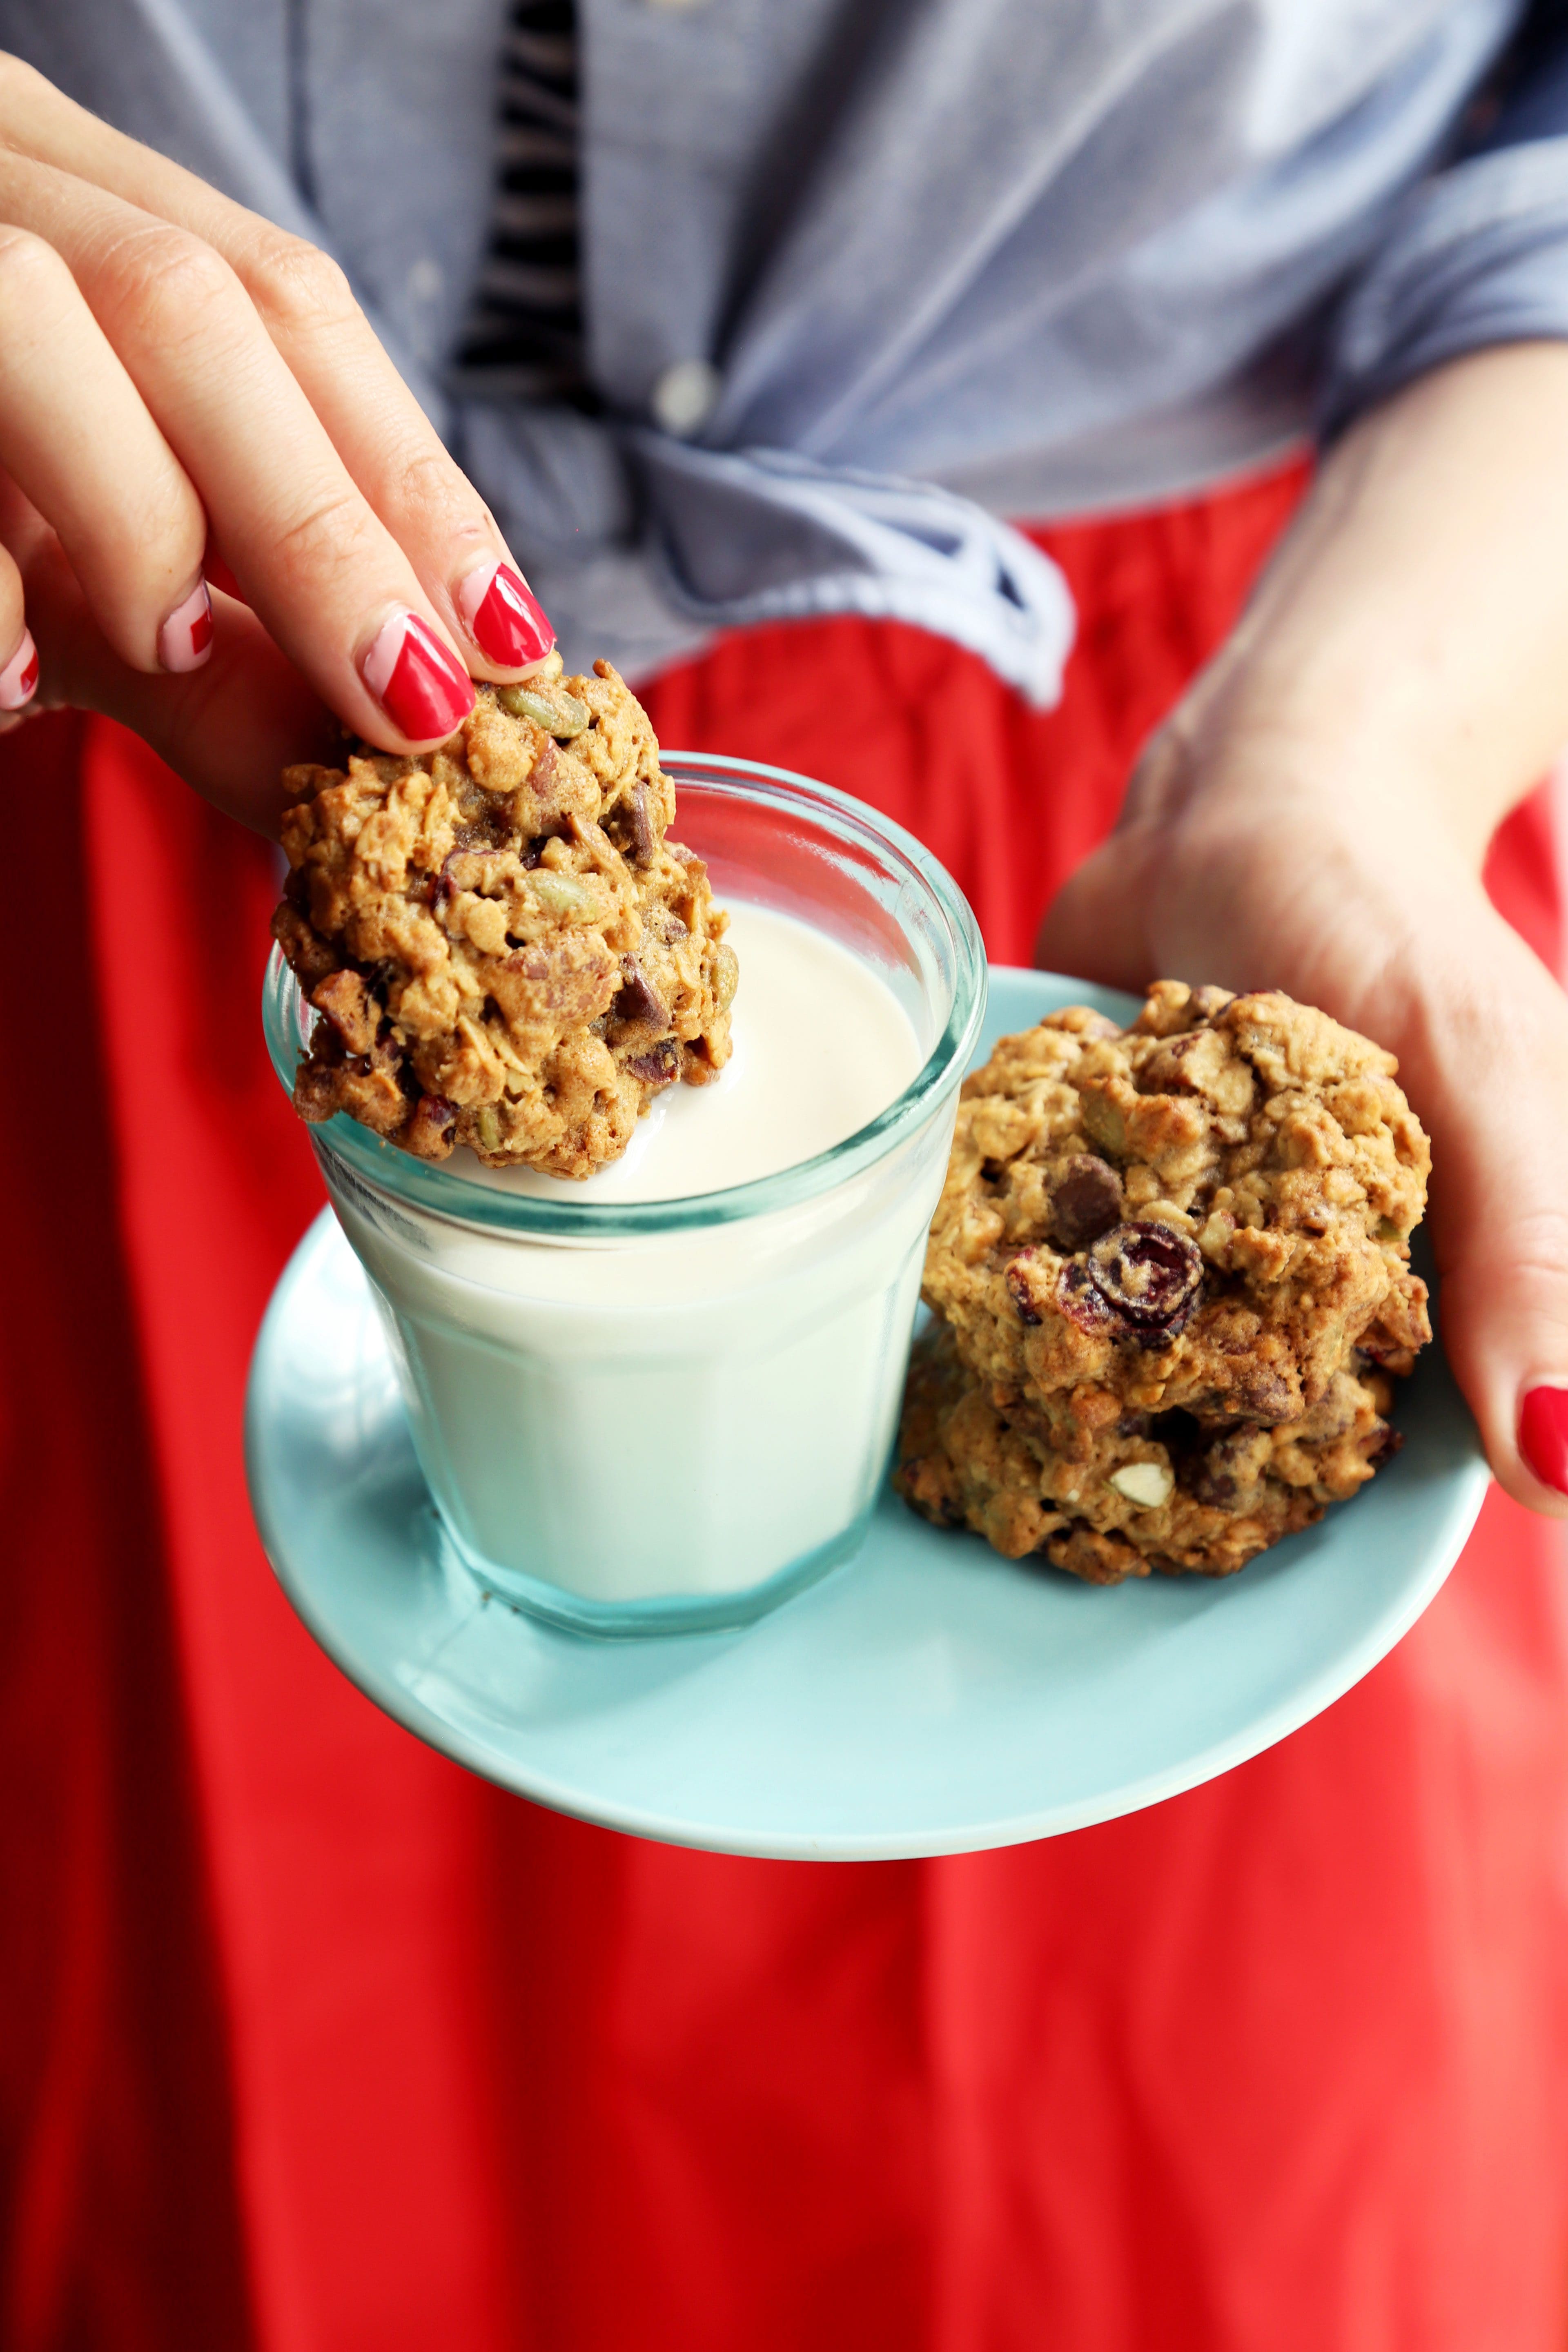 How to Make the Best Oatmeal - Cookie and Kate